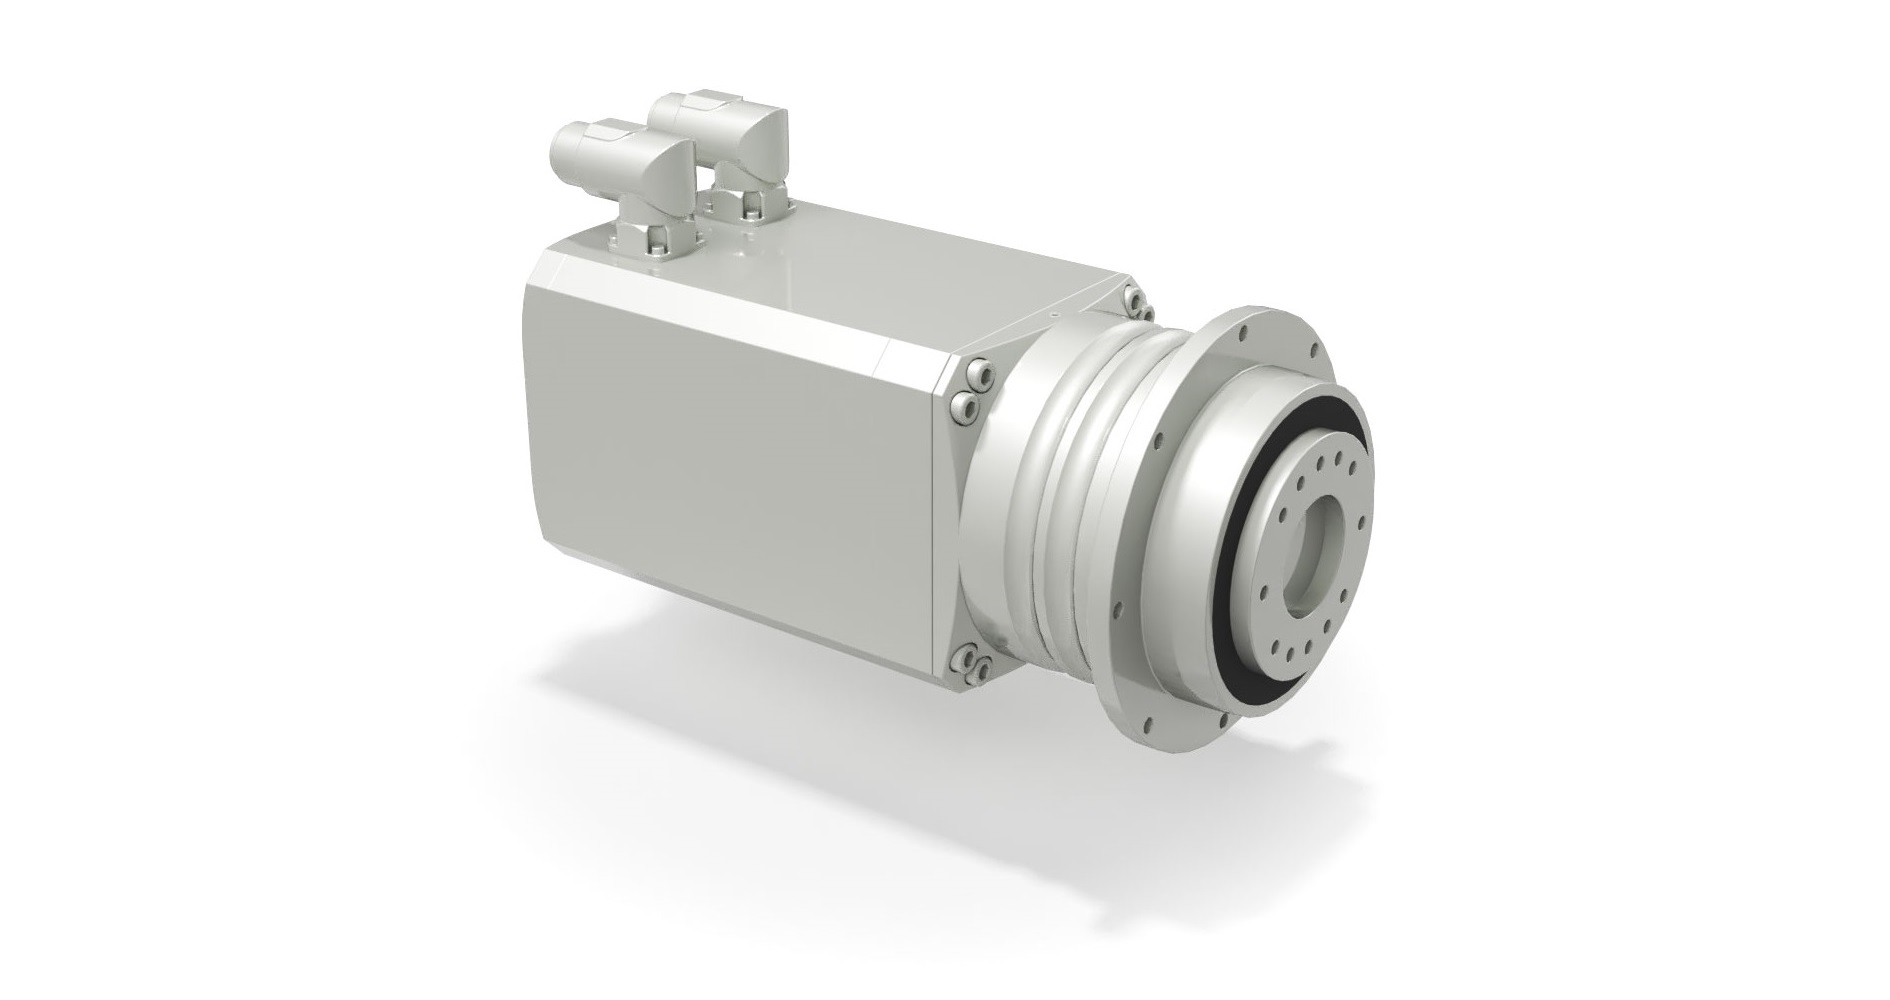 HVH Industrial Solutions is Expanding Its Electric Motors Offerings